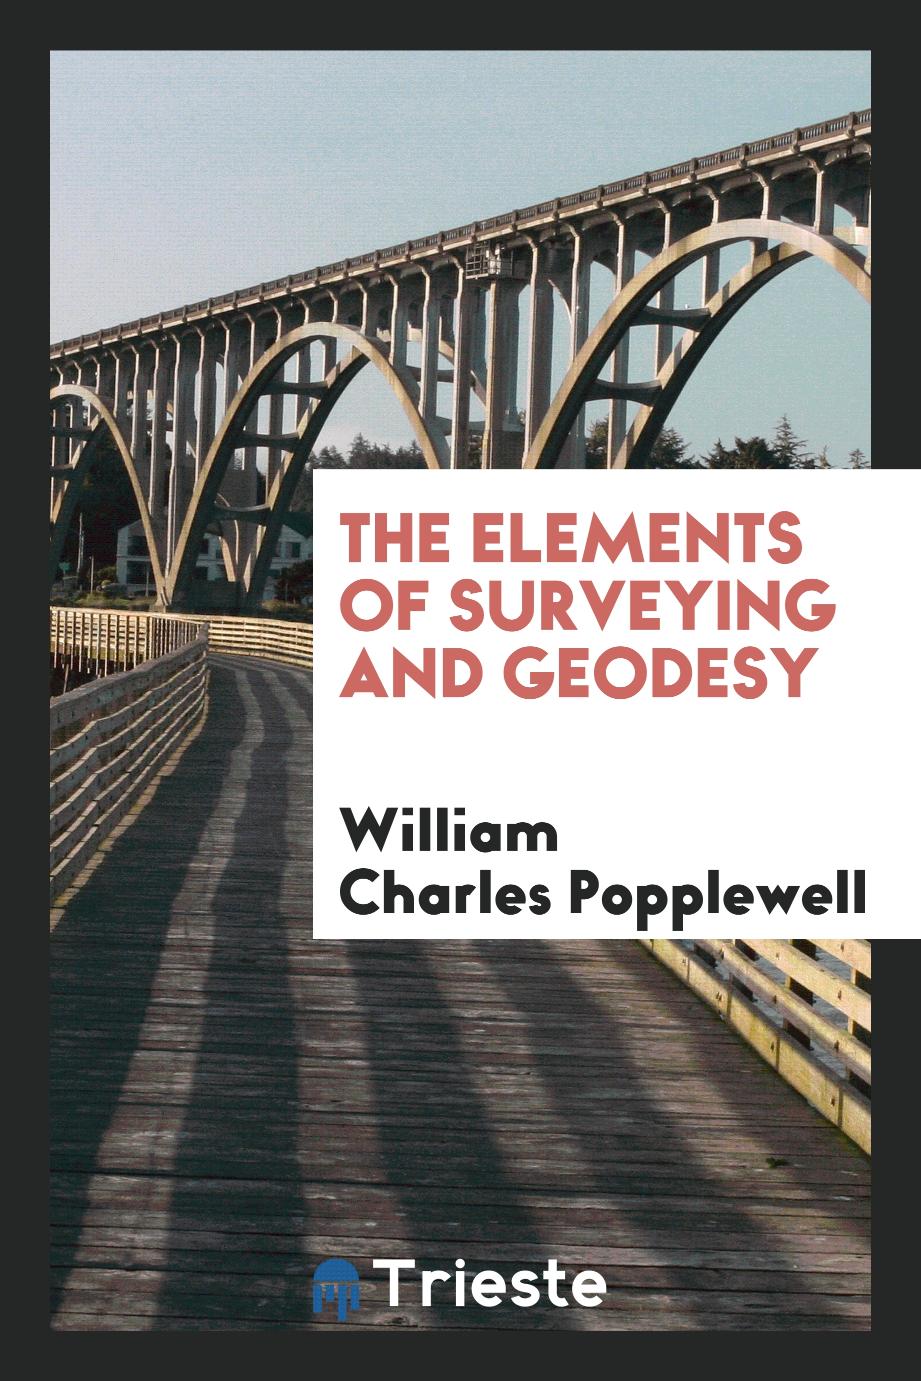 William Charles Popplewell - The Elements of Surveying and Geodesy